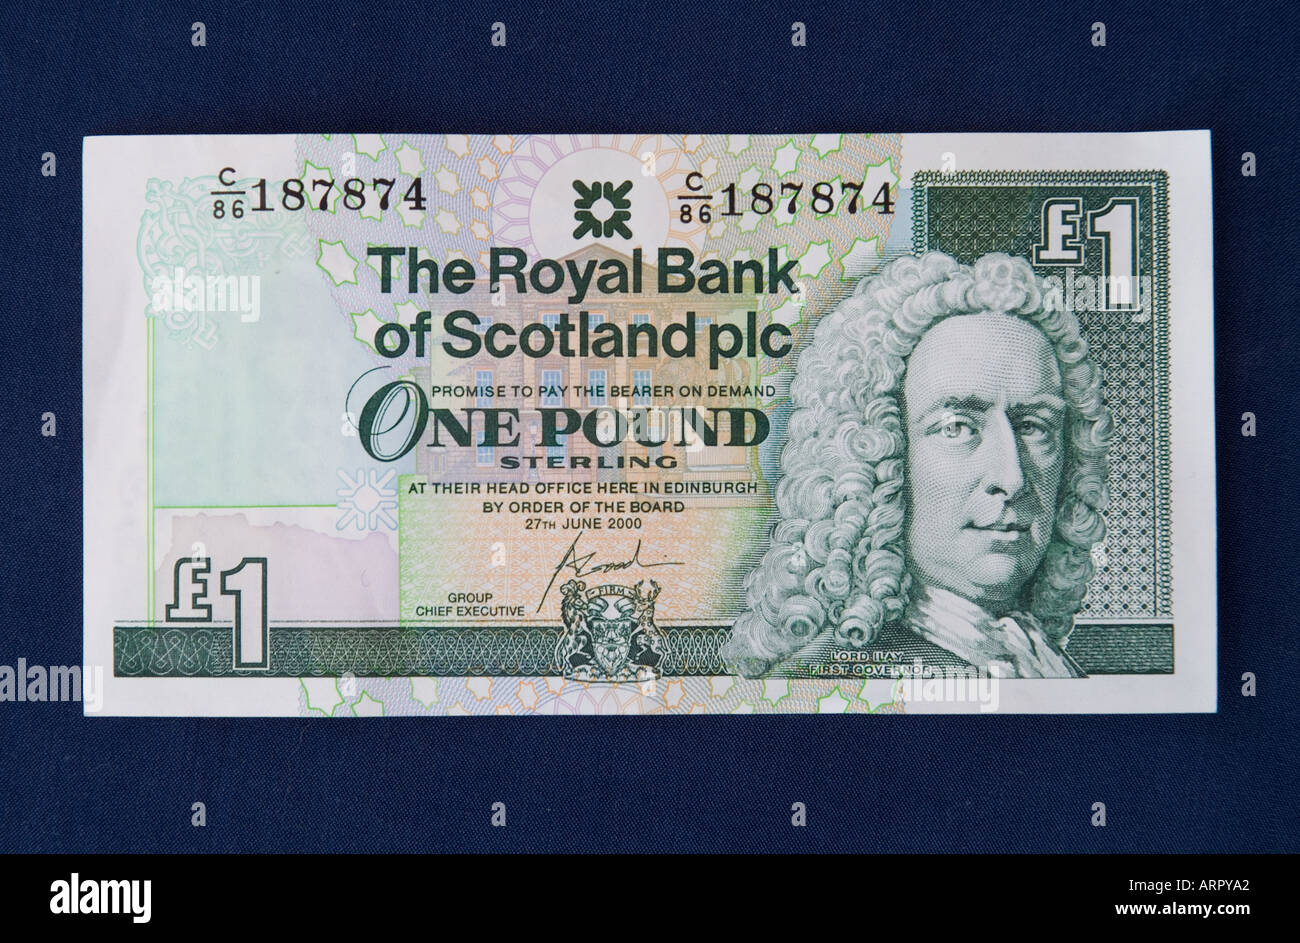 dh Royal Bank of Scotland MONEY SCOTLAND UK Scottish one pound note banknote 1 rbs cut out notes Stock Photo